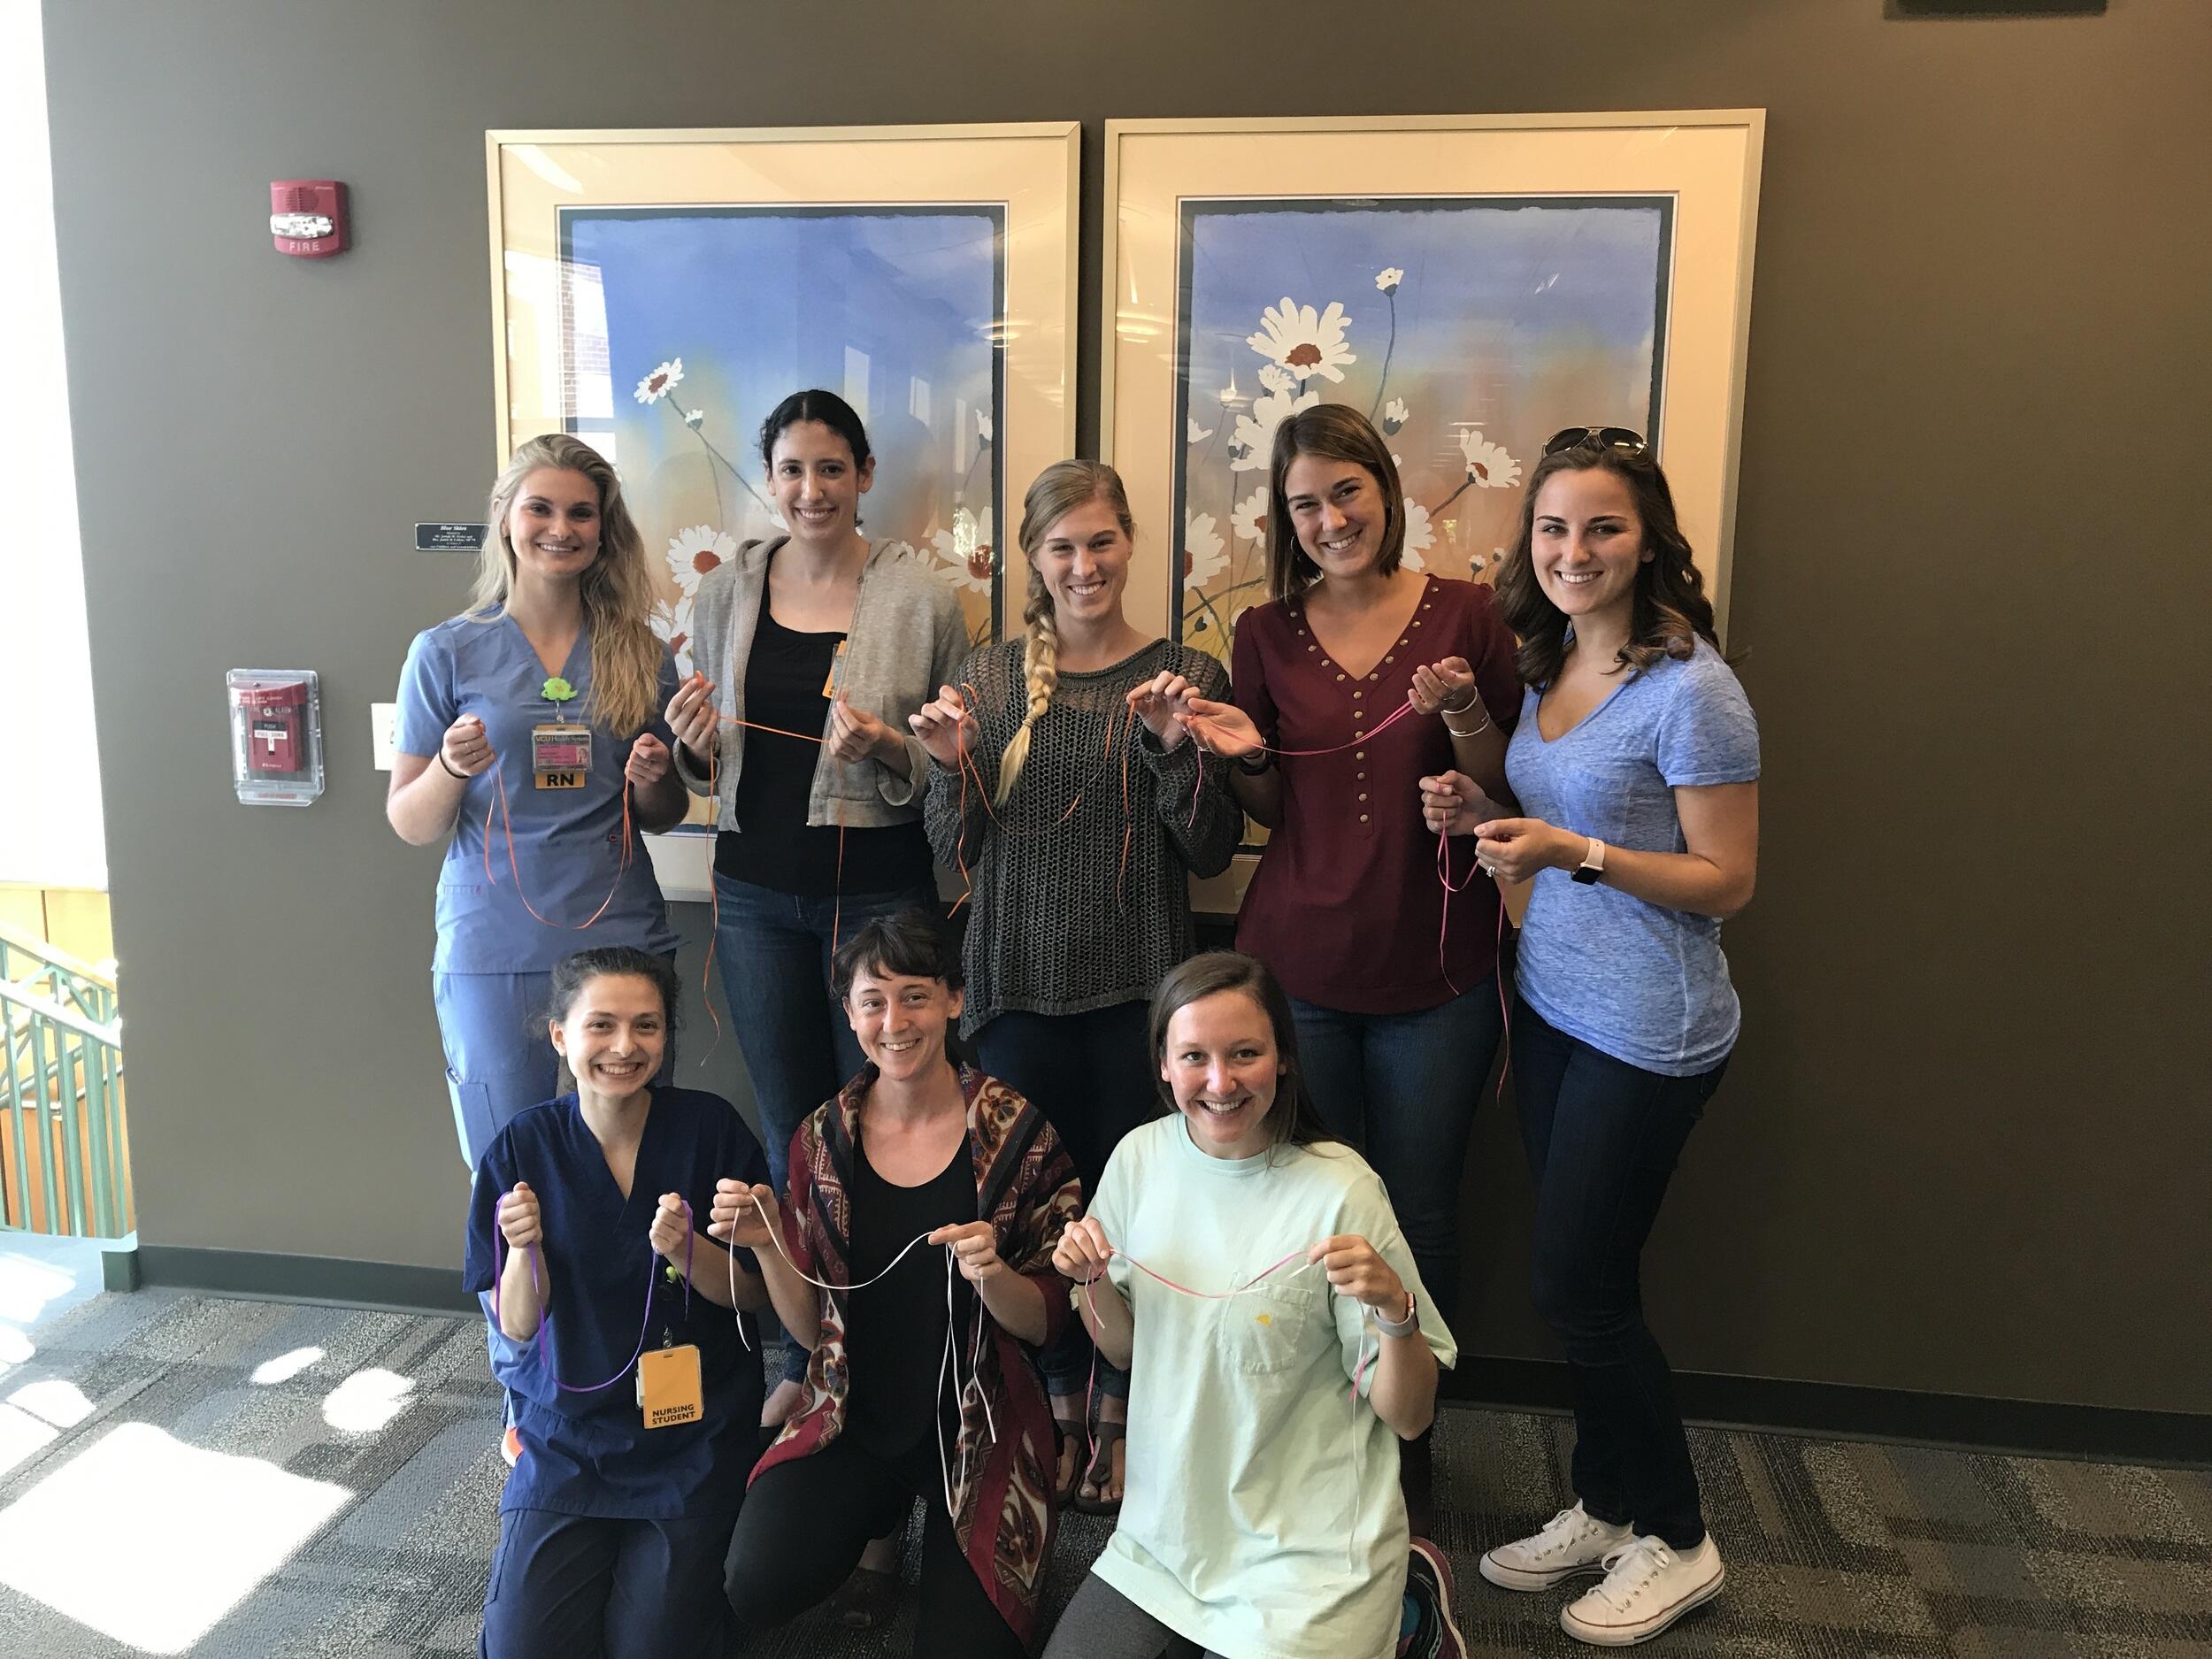 Participants in a recent doula training hold pieces of ribbon that symbolically bind the nursing students and trainers. The ribbons are tied together in a circle. After training, there is a ceremony where the ribbons are untied and placed in the birth bags of newly trained doulas.